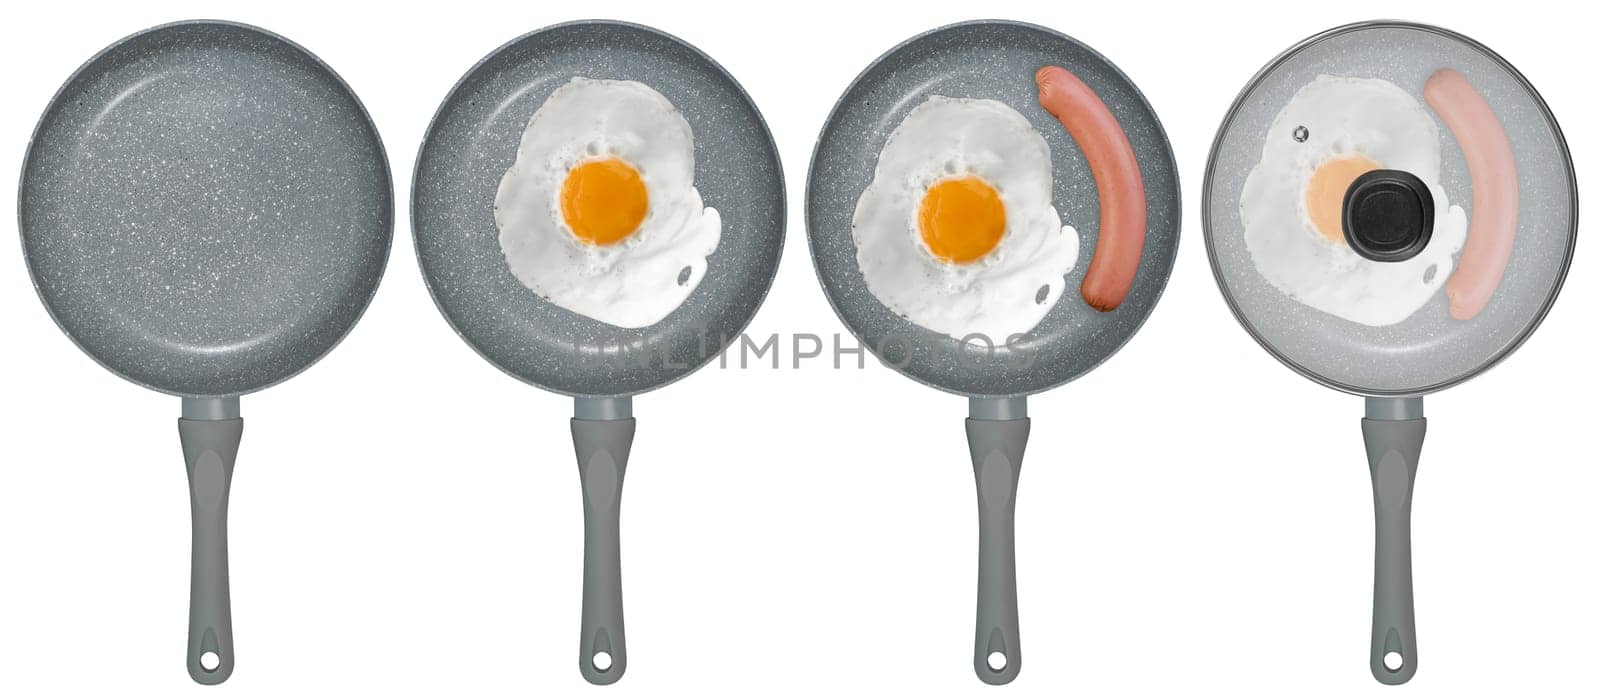 scrambled eggs and sausage on a frying pan on a white background in isolation